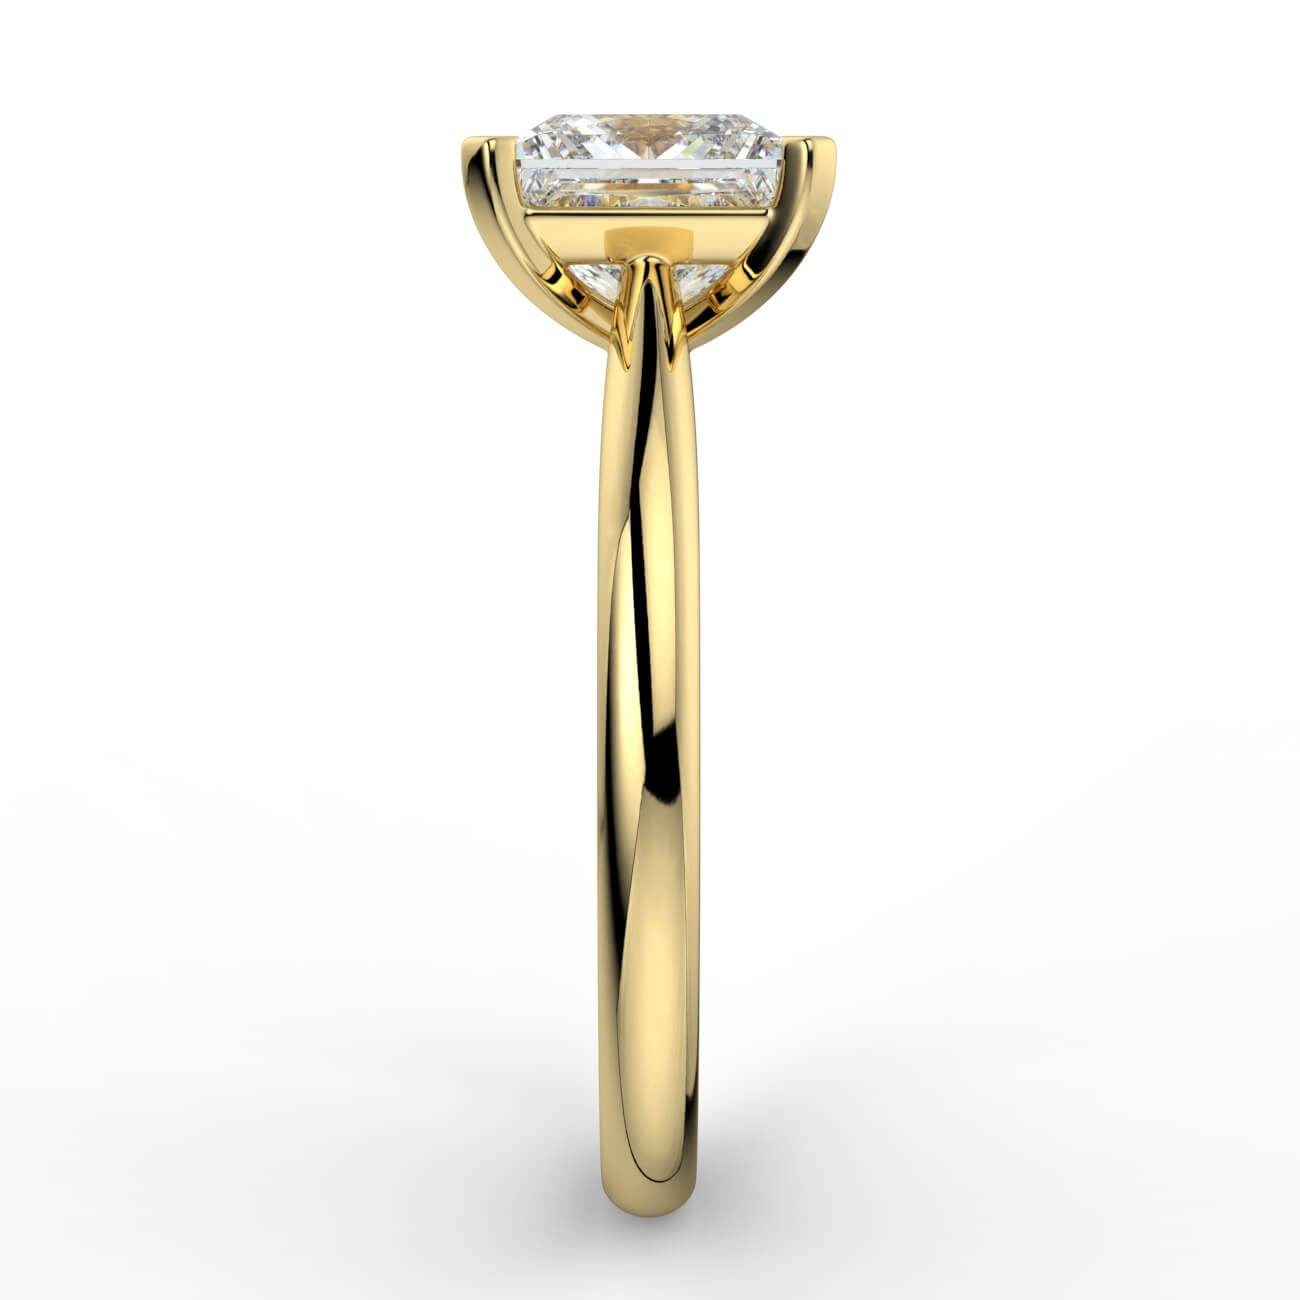 Princess cut diamond cathedral engagement ring in yellow gold – Australian Diamond Network